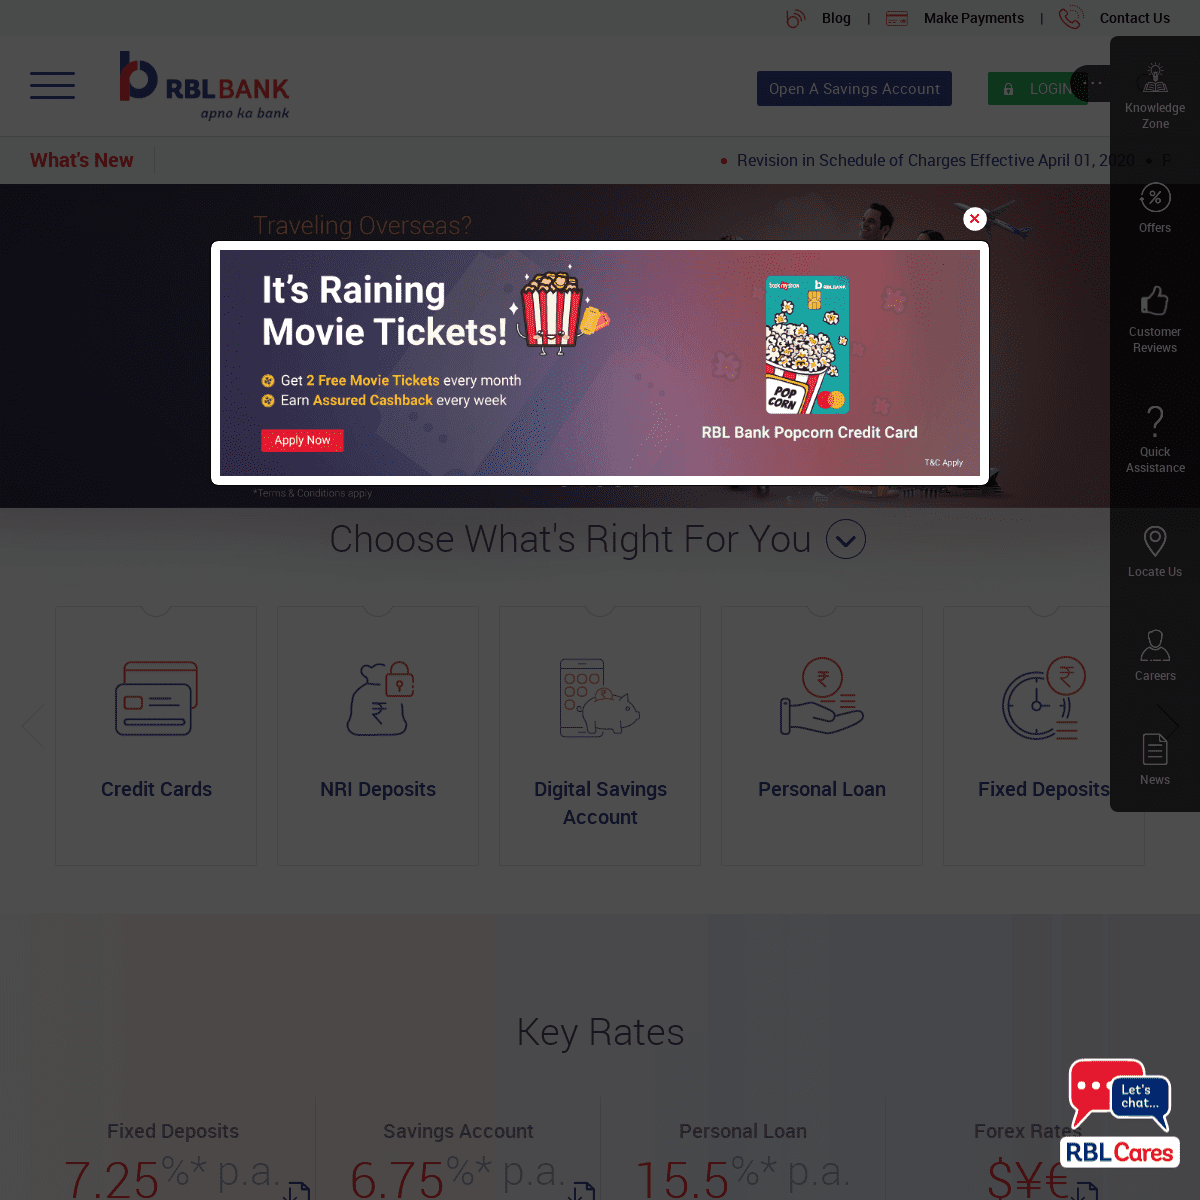 A complete backup of rblbank.com